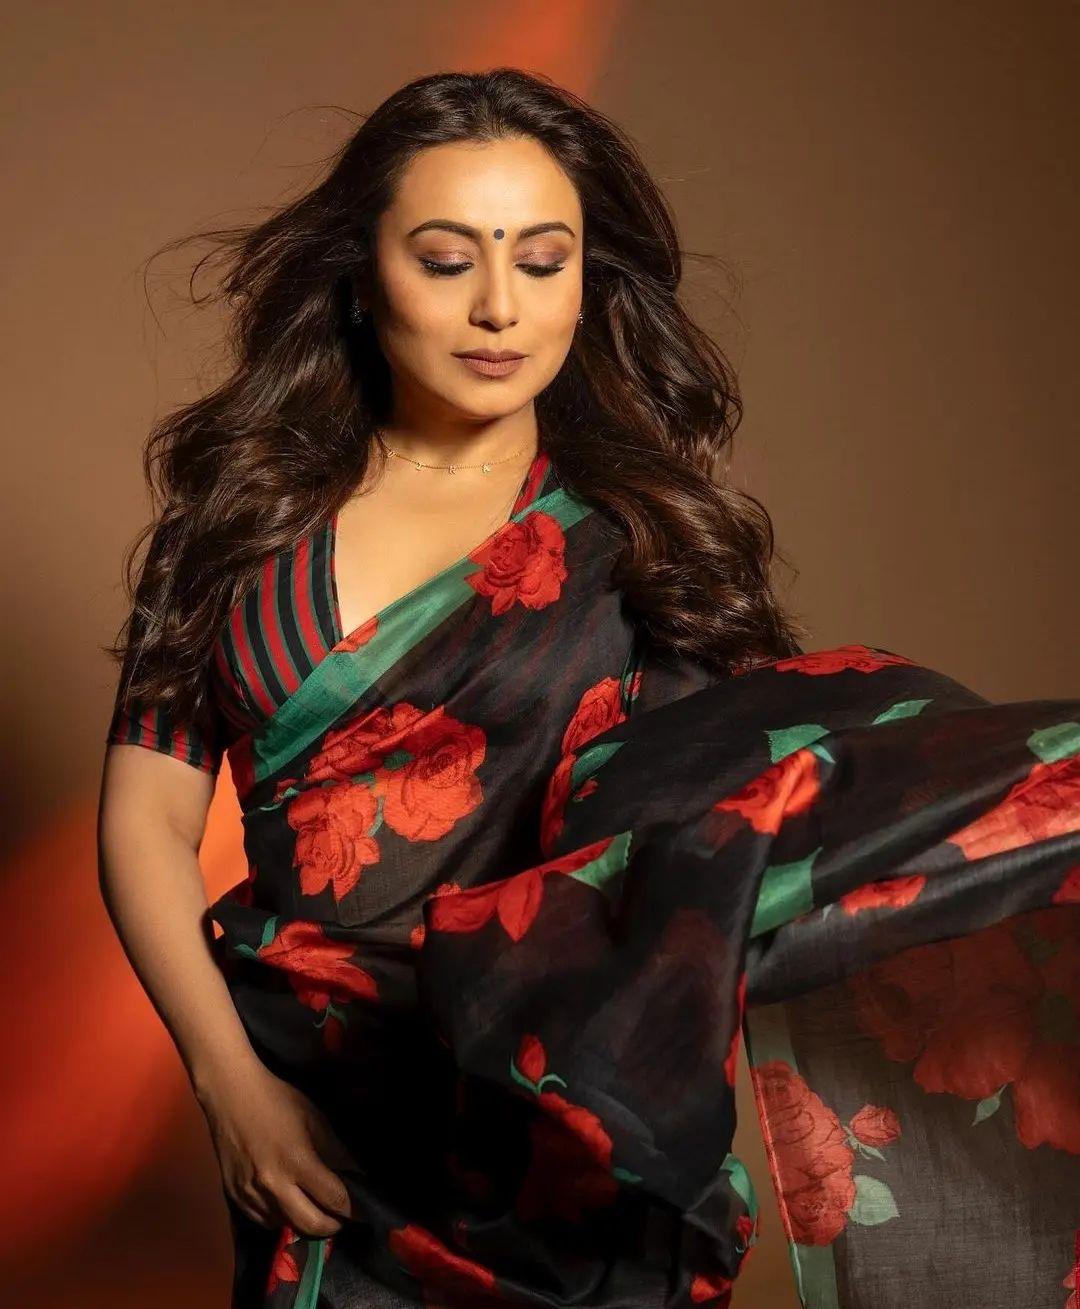 She wore the saree with a plunging blouse. The actress proves that she is the 'rani' of styling sarees